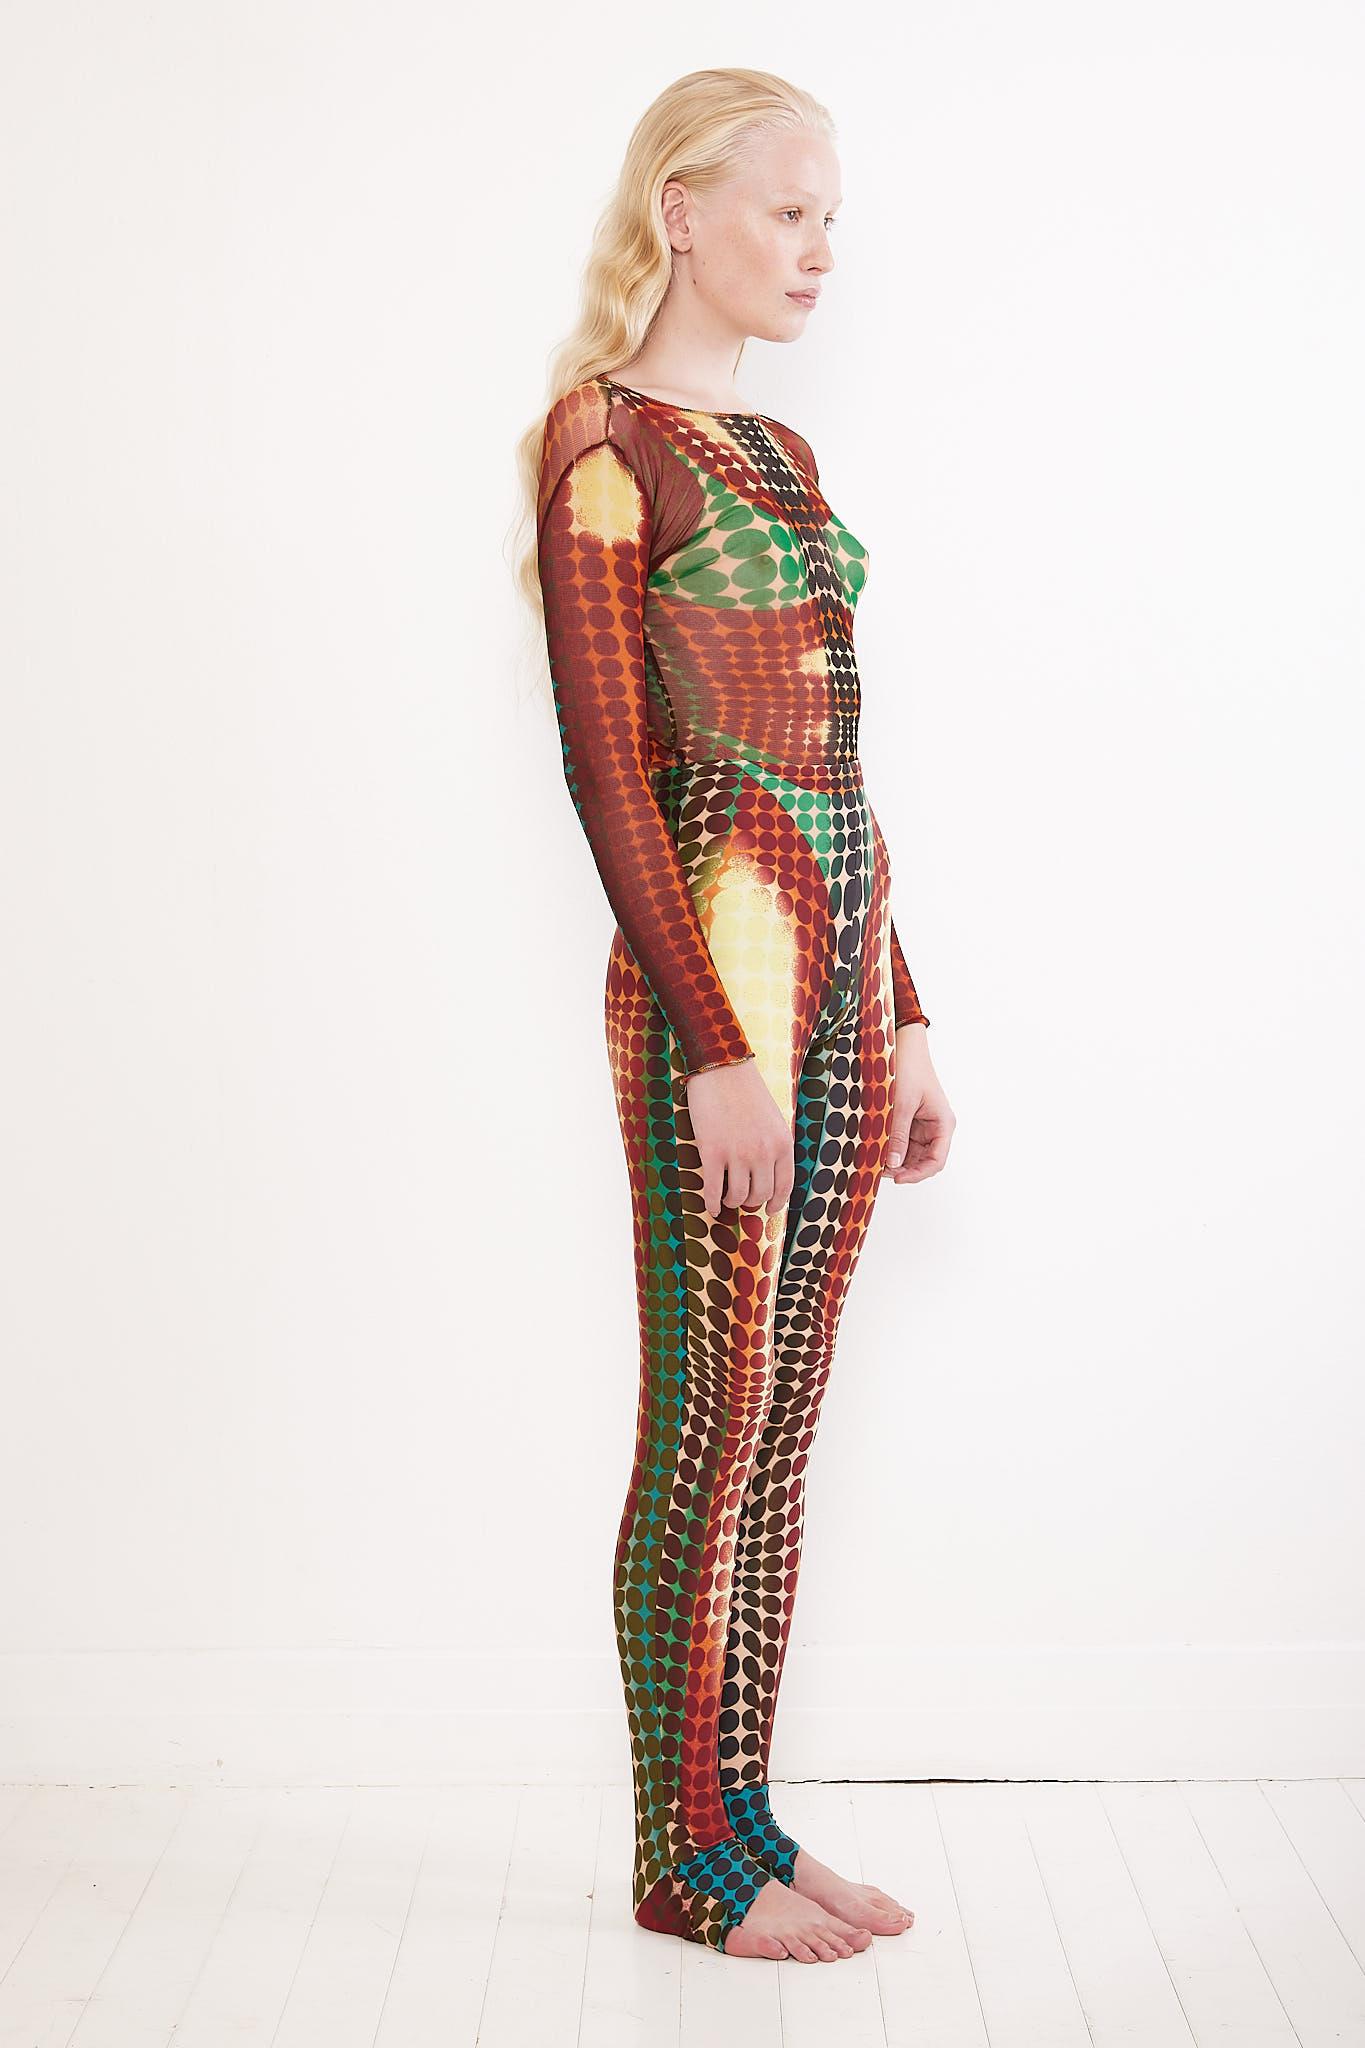 Dating to the F/W 1995 Mad Max themed 'Cyber' collection, Jean Paul Gaultier's already iconic Victor Vasarely inspired Cyberdot pieces have reached new heights of desirability after being worn by Kim Kardashian & Cardi B. This Cyberdot set comprises